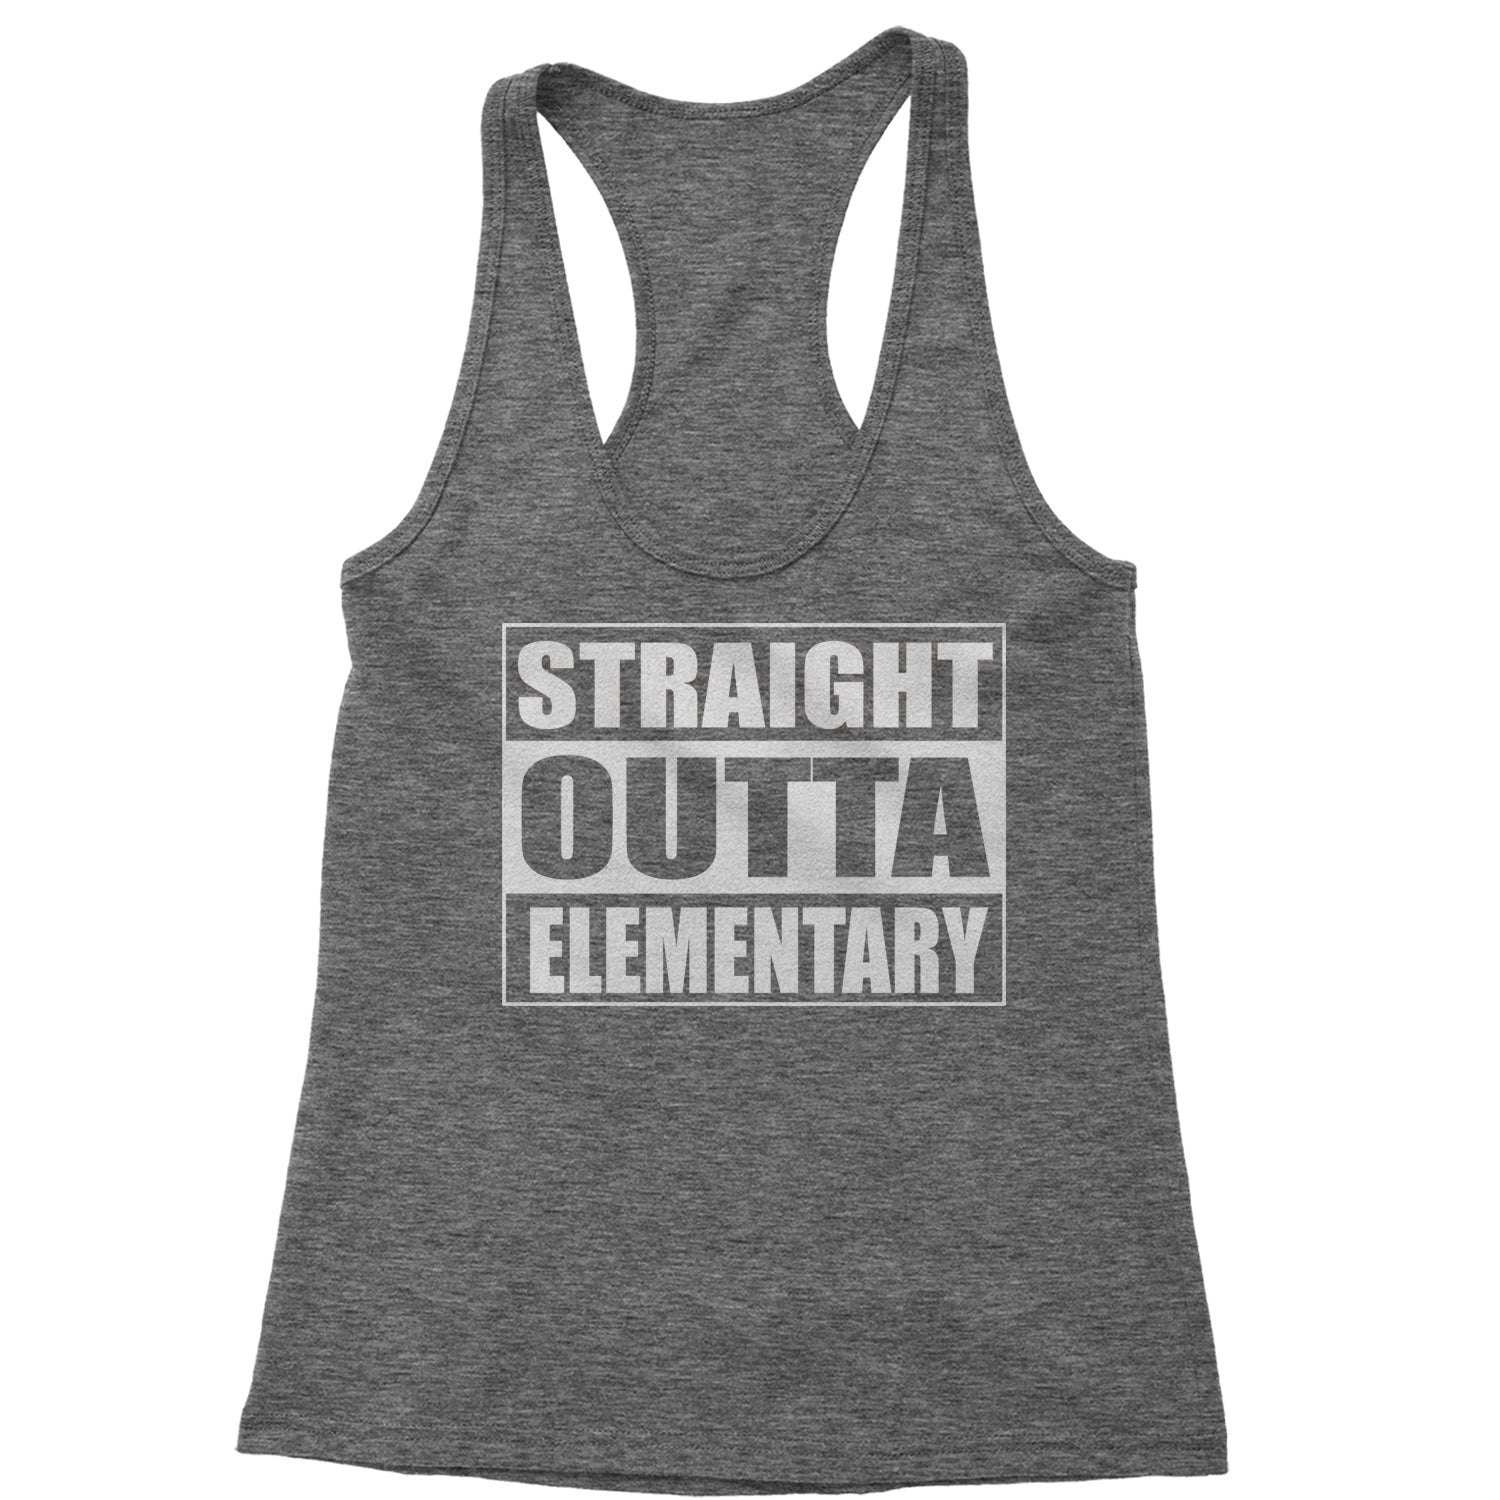 Straight Outta Elementary Racerback Tank Top for Women 2020, 2021, 2022, class, of, quarantine, queen by Expression Tees